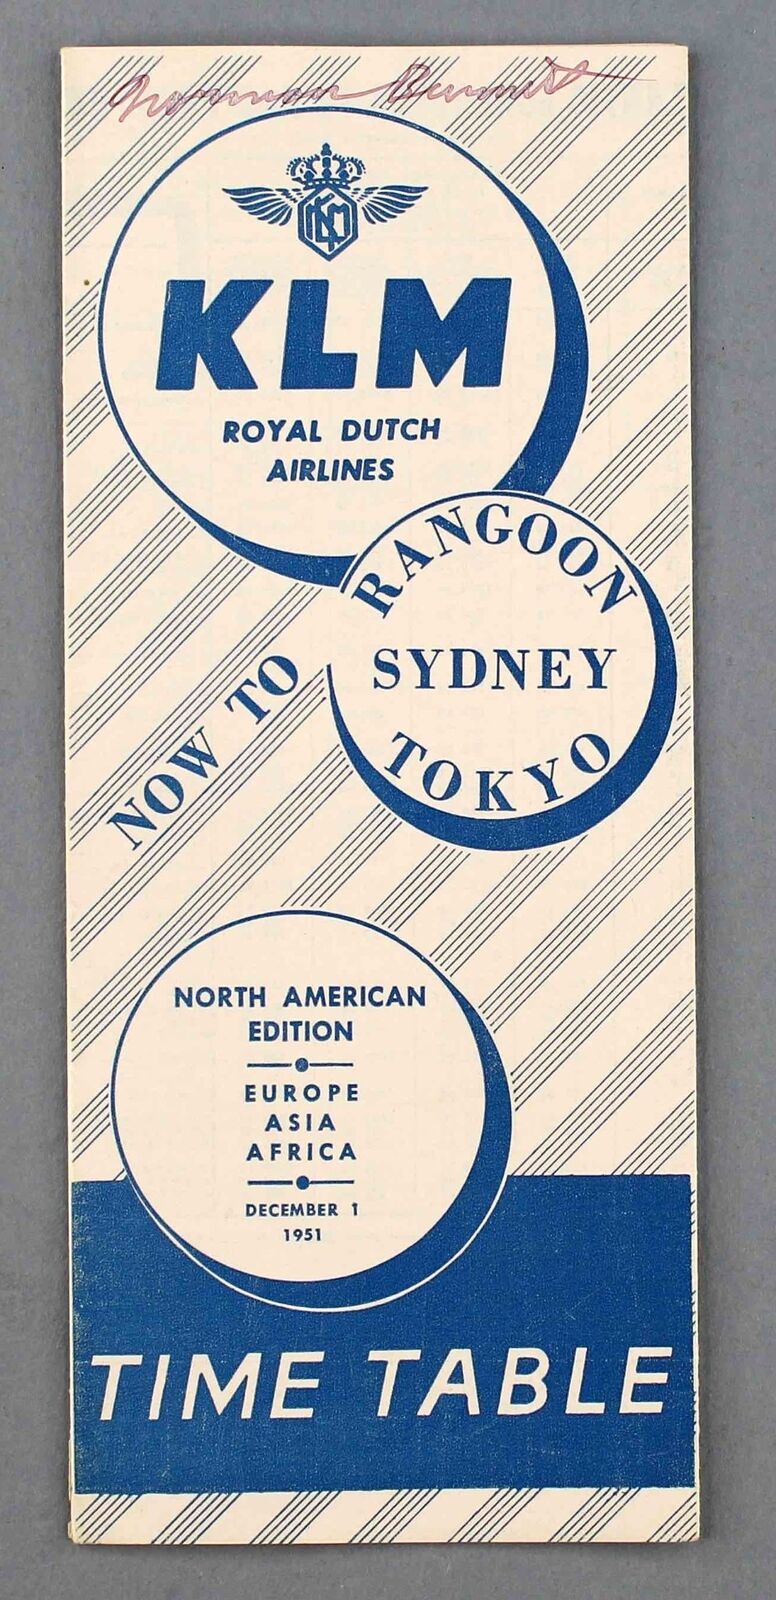 KLM TIMETABLE DECEMBER 1951 NORTH AMERICAN EDITION SCHEDULE ROYAL DUTCH AIRLINES